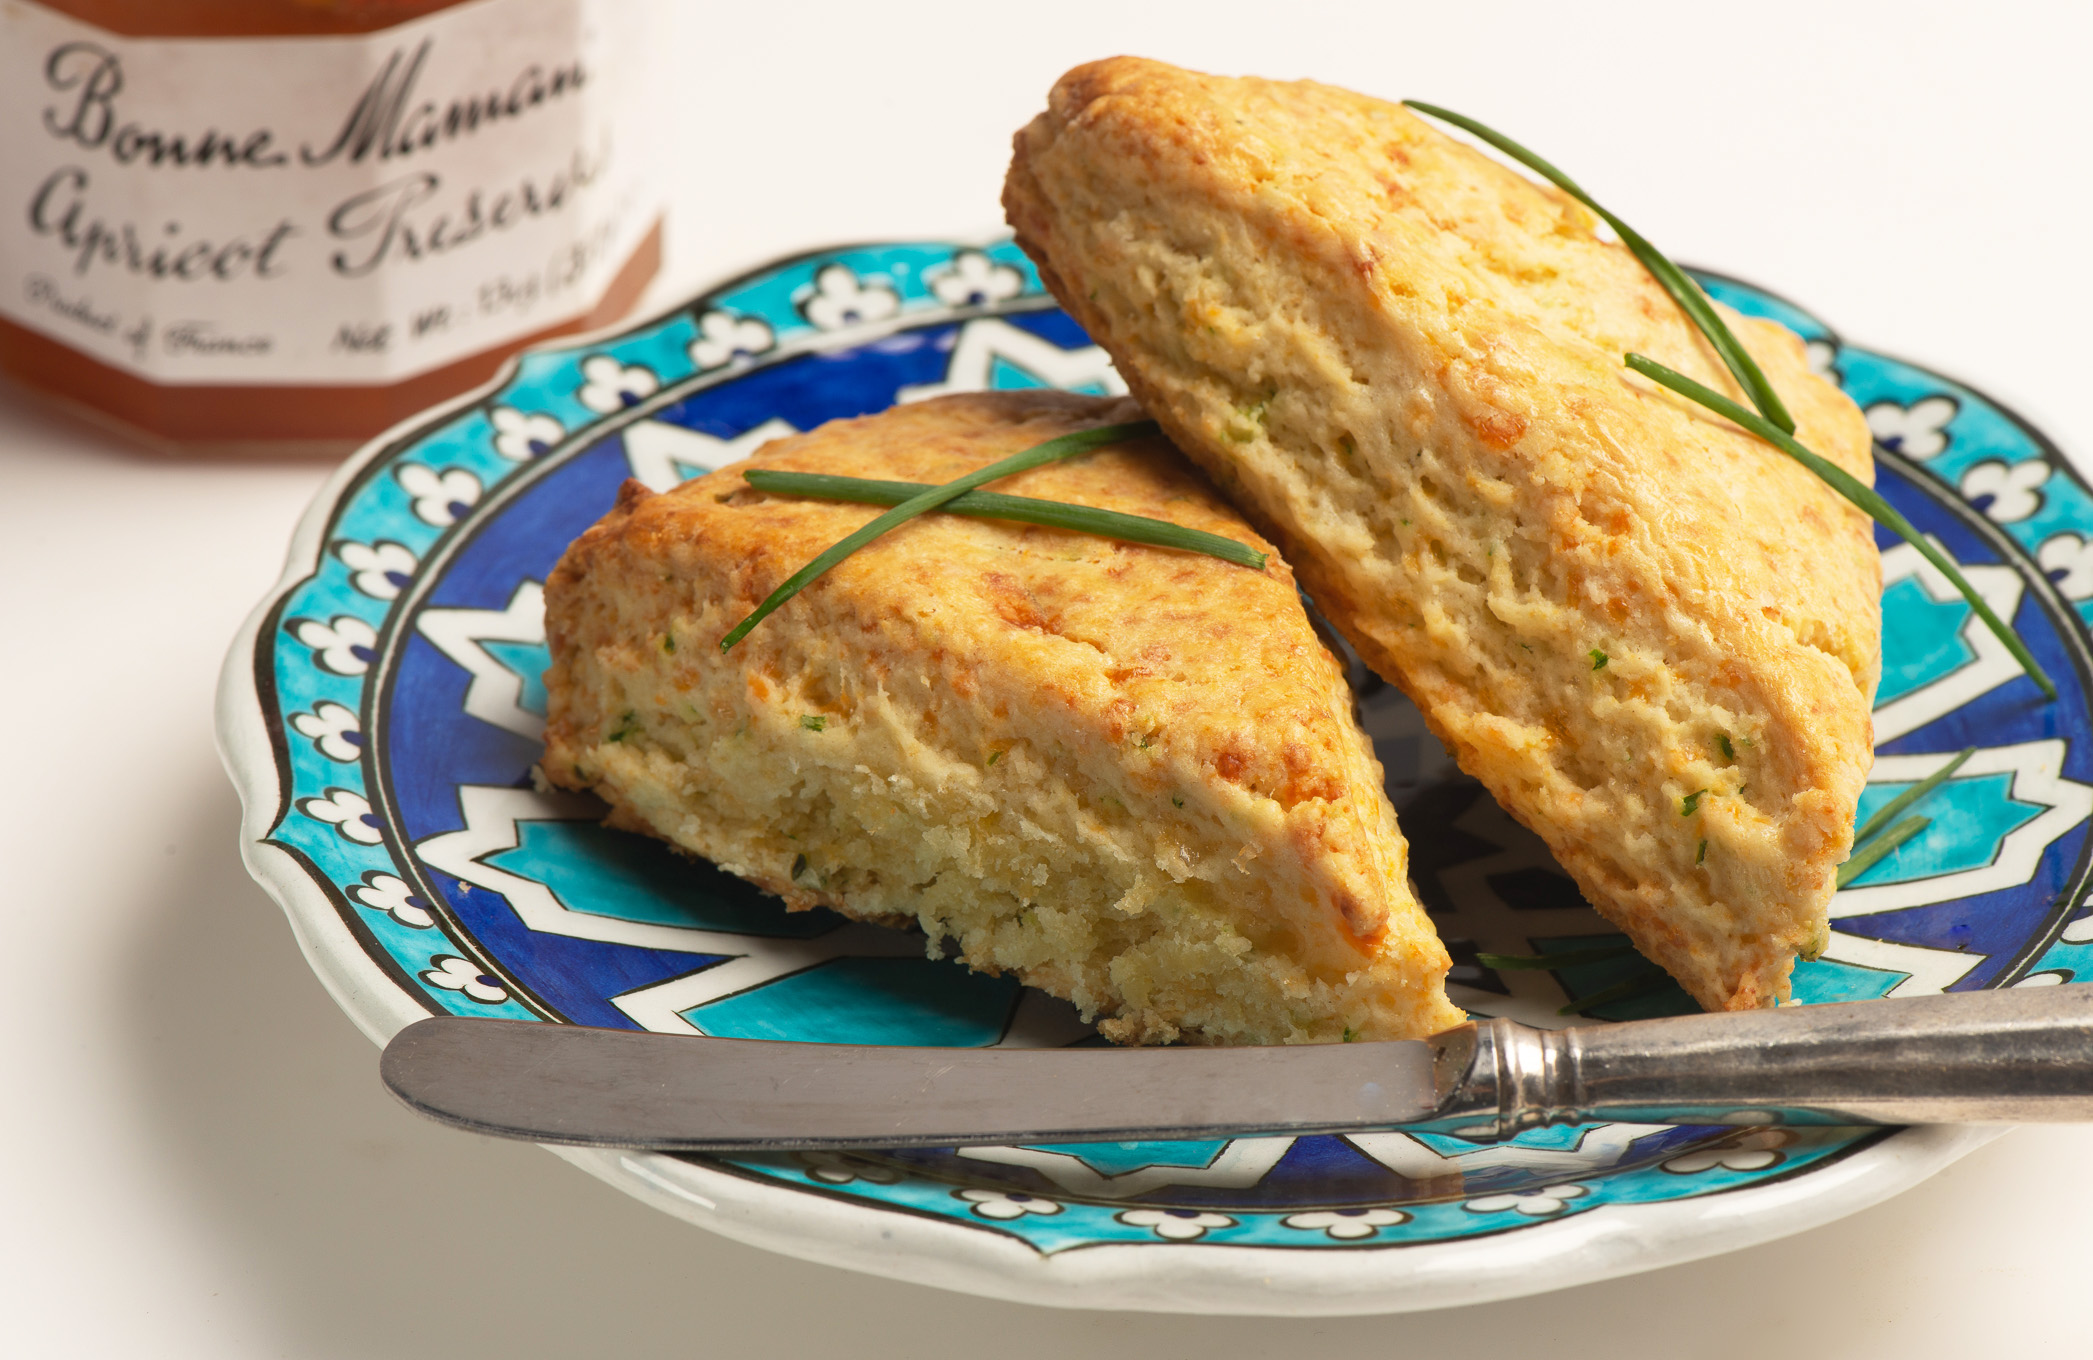 Cheddar Scones: From Meh to Marvelous